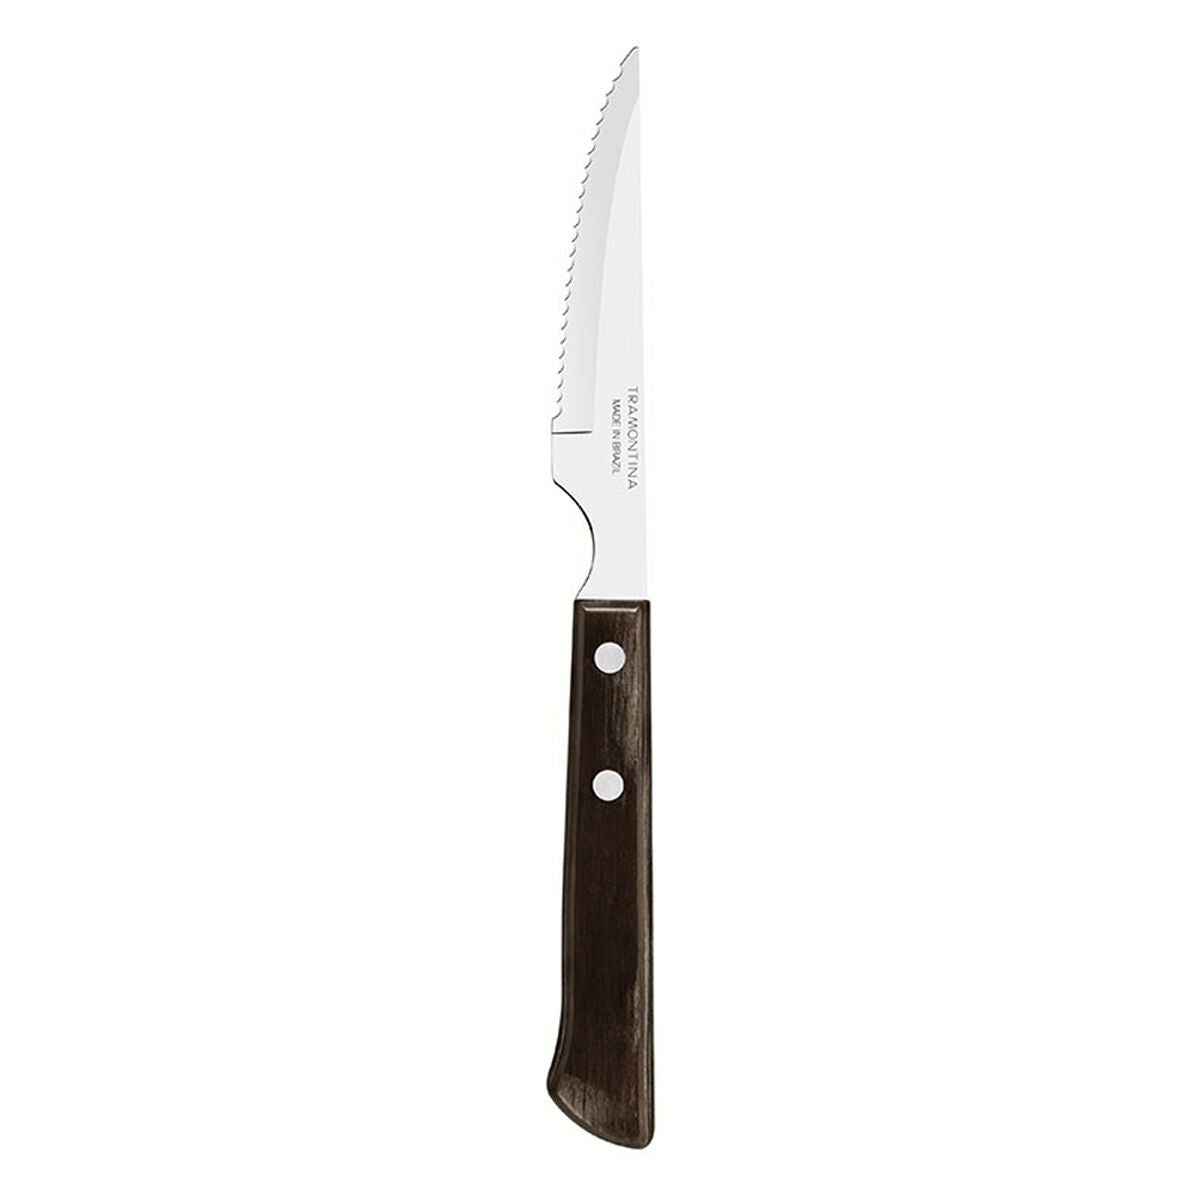 Meat Knife Set Tramontina 21109-694 Polywood Stainless steel 6 Units